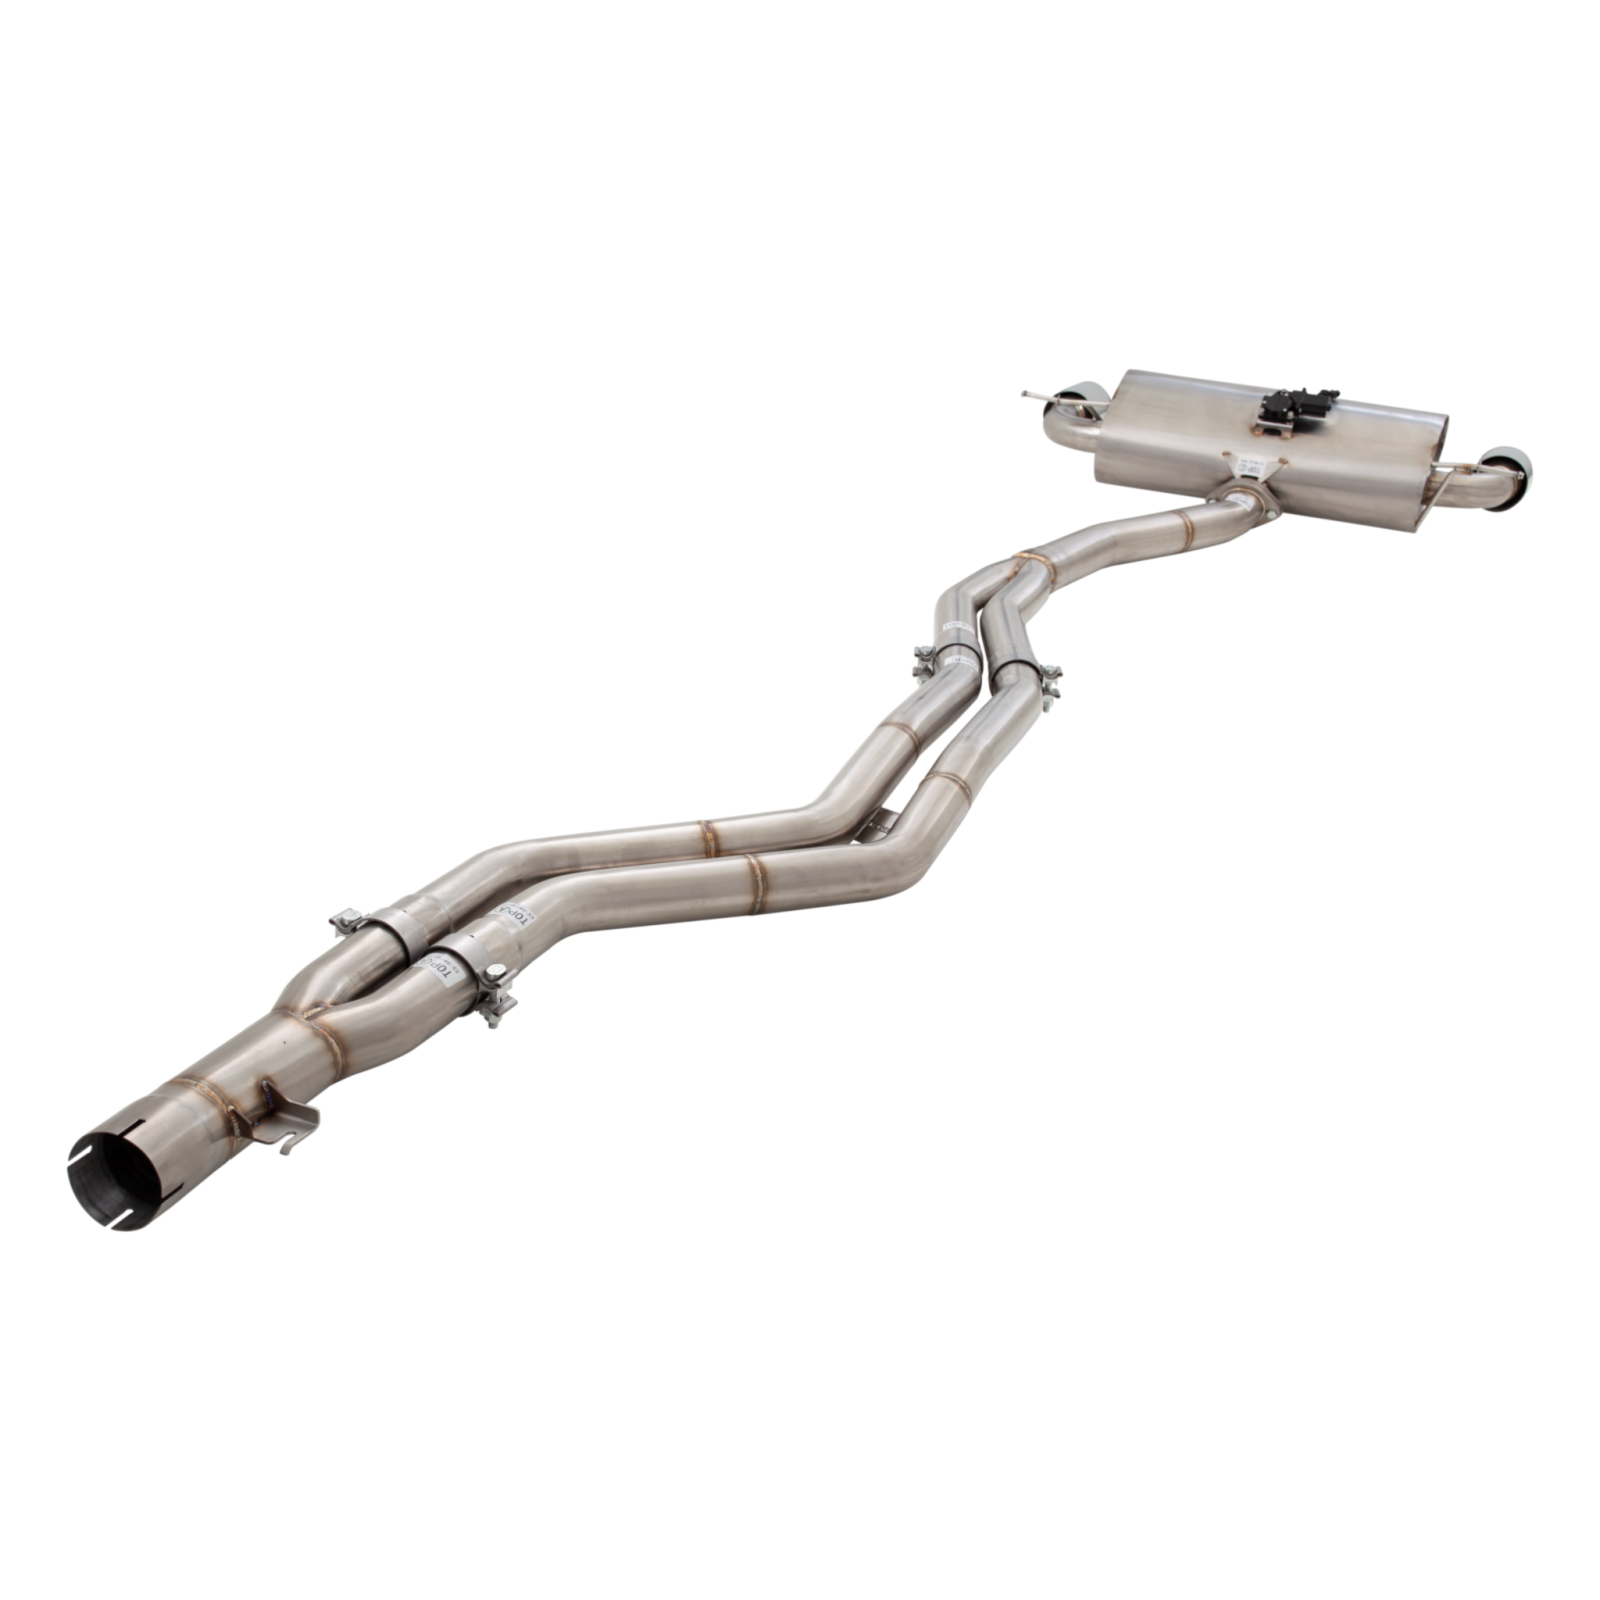 XFORCE Twin 2.5" Catback Exhaust for BMW M135I F20 with Varex Muffler